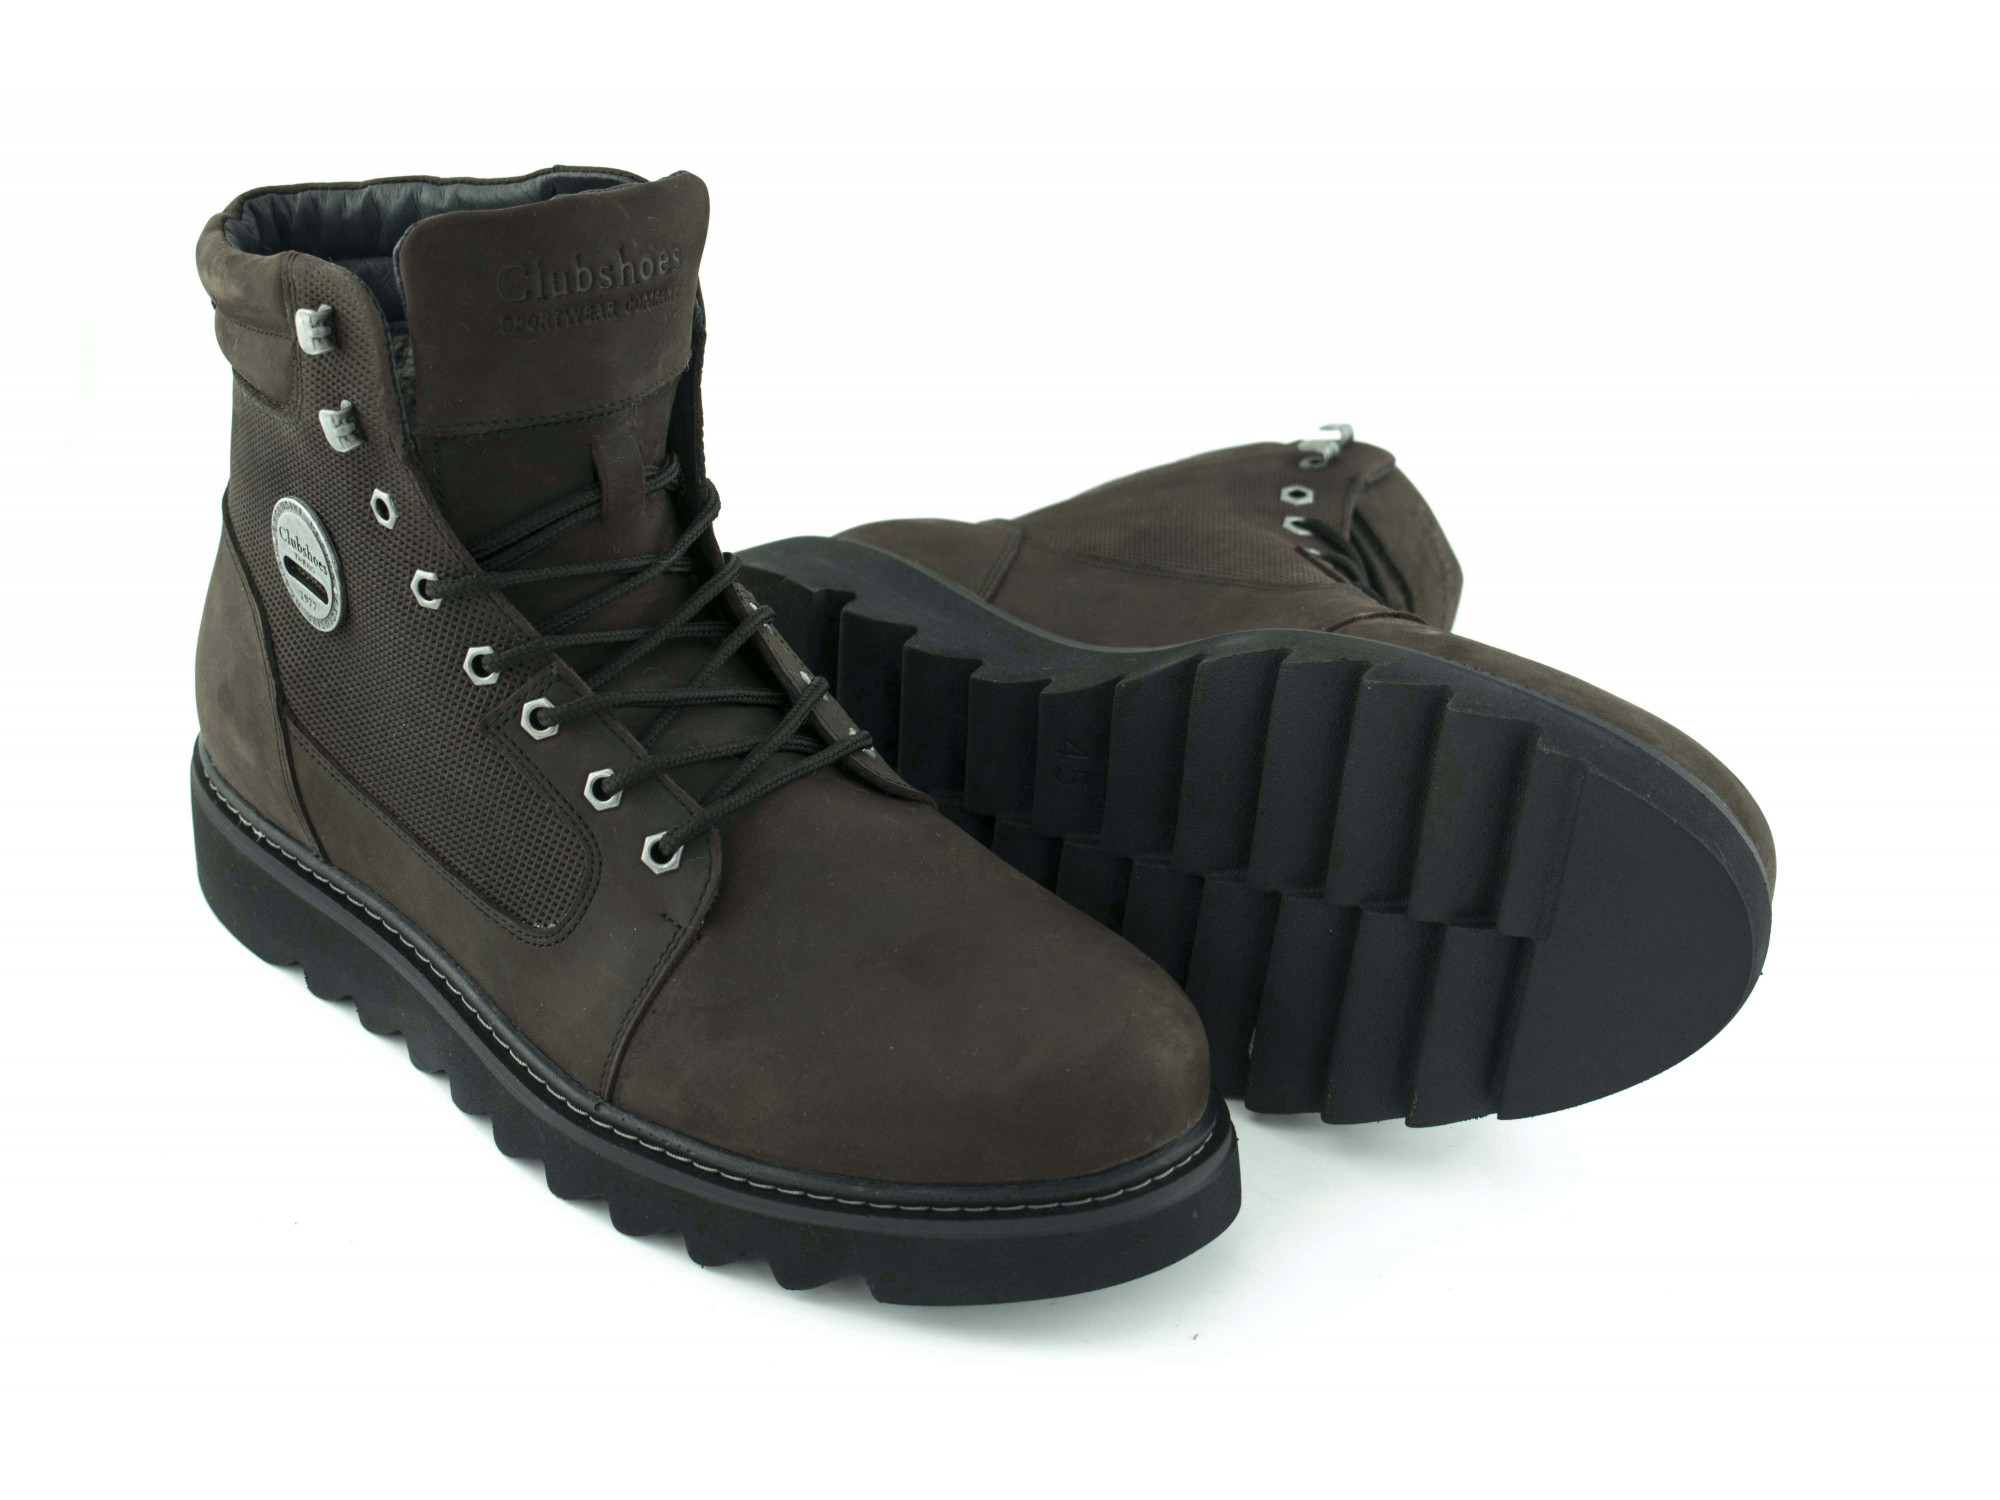 Clubshoes ВВ brown